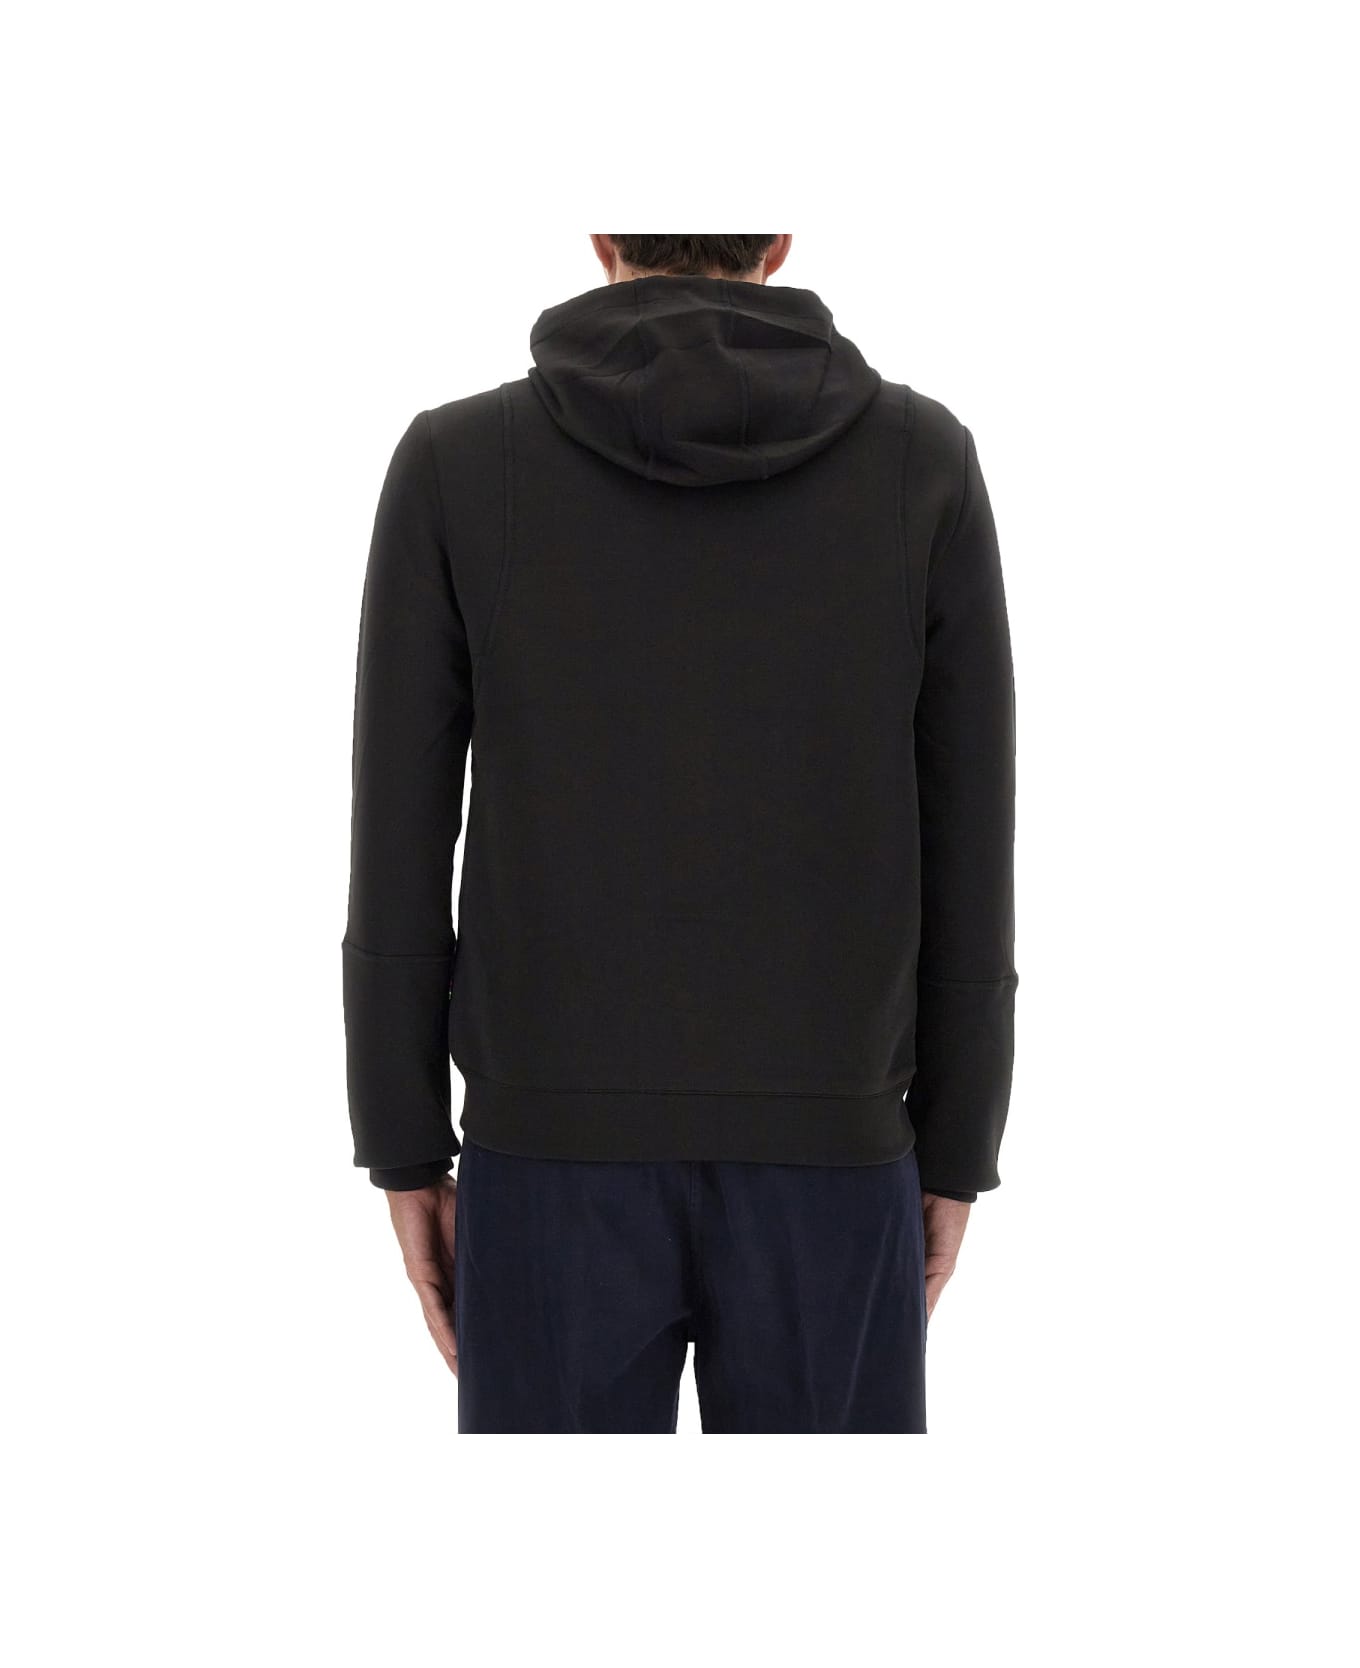 PS by Paul Smith Hooded Jacket - Black